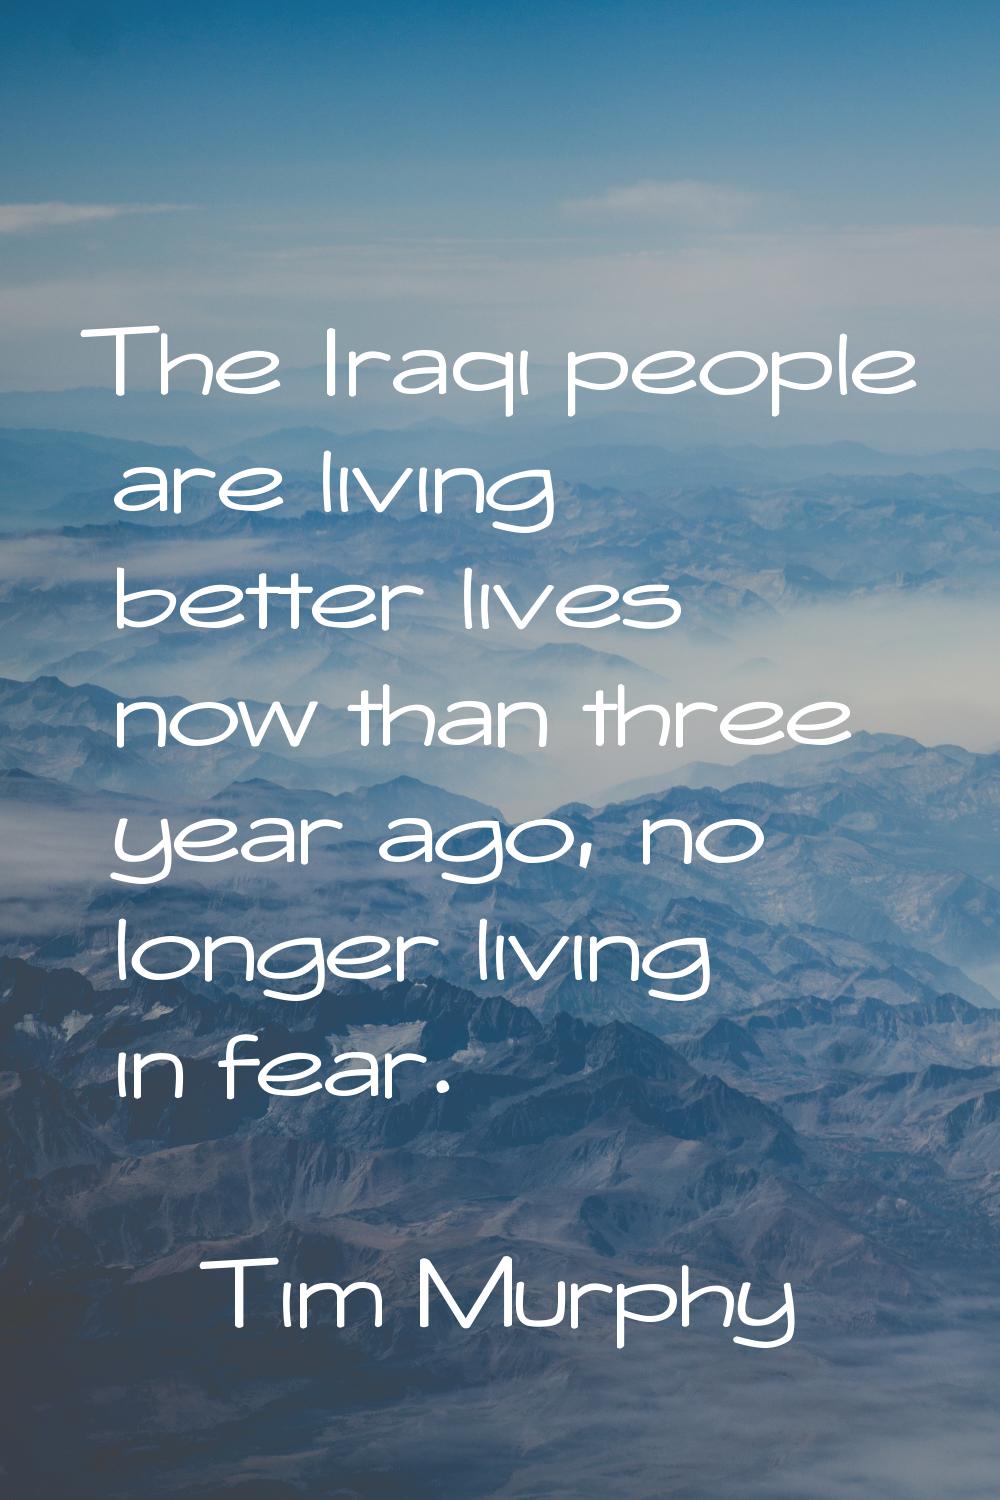 The Iraqi people are living better lives now than three year ago, no longer living in fear.